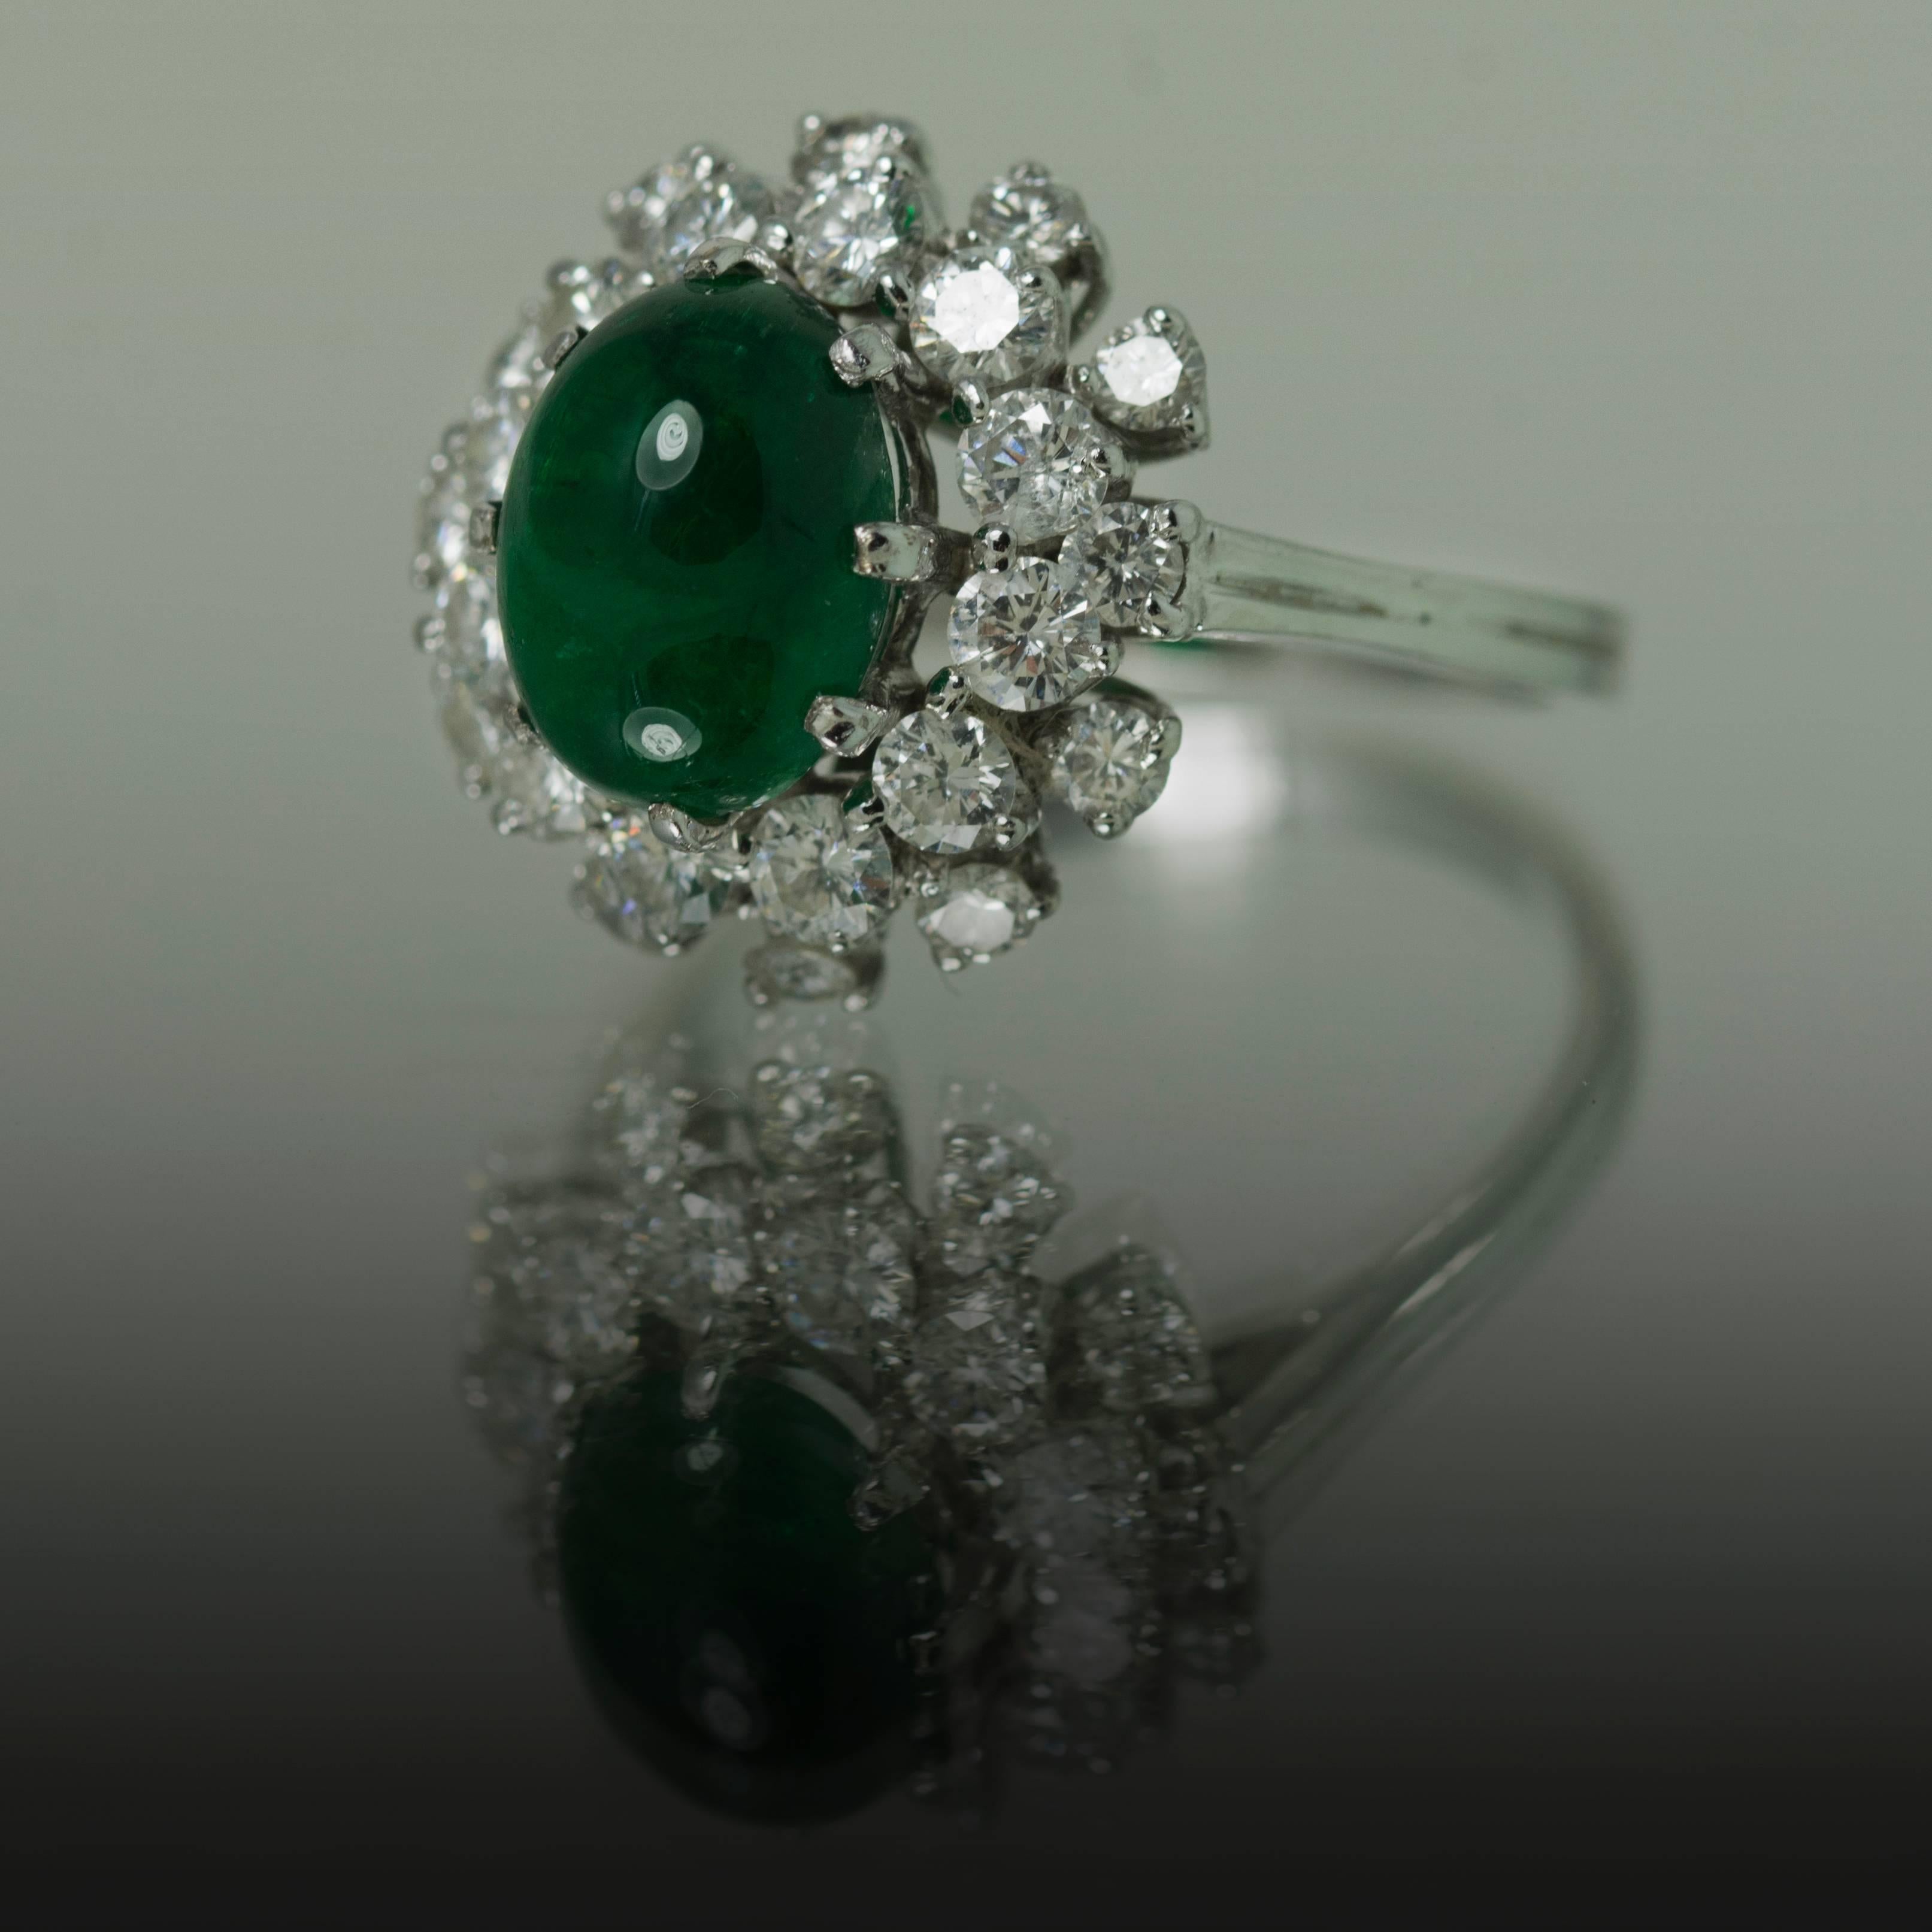 Beautiful Platinum Ring with super gems 3.23 carat Colombian Emerald cabochon and 24 fine round brilliant diamonds weighing 1.06 carats.